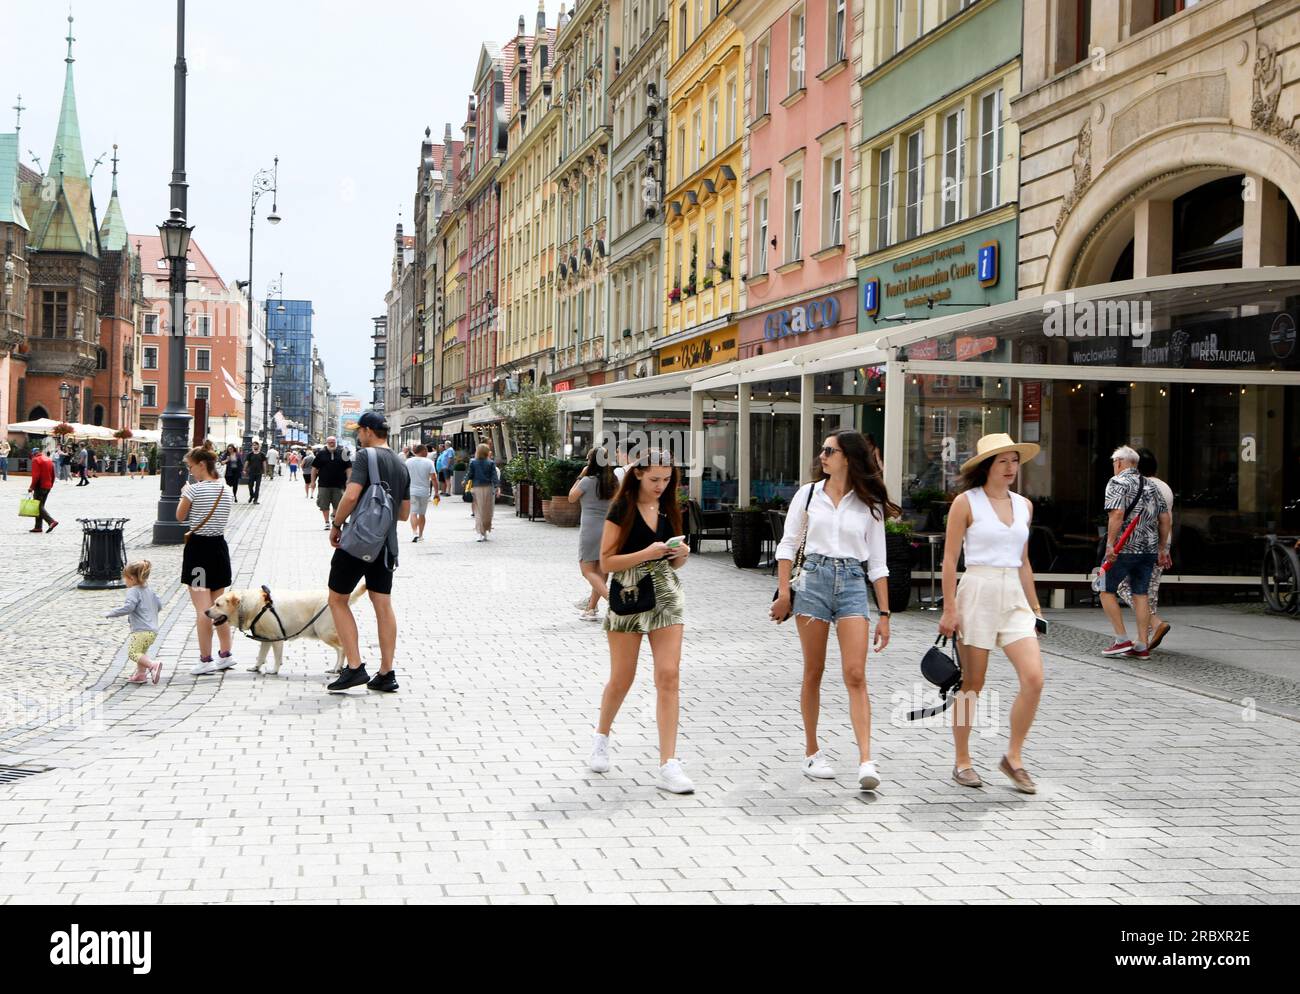 Young women, in the street, Rynek, Wroclaw, Poland Stock Photo